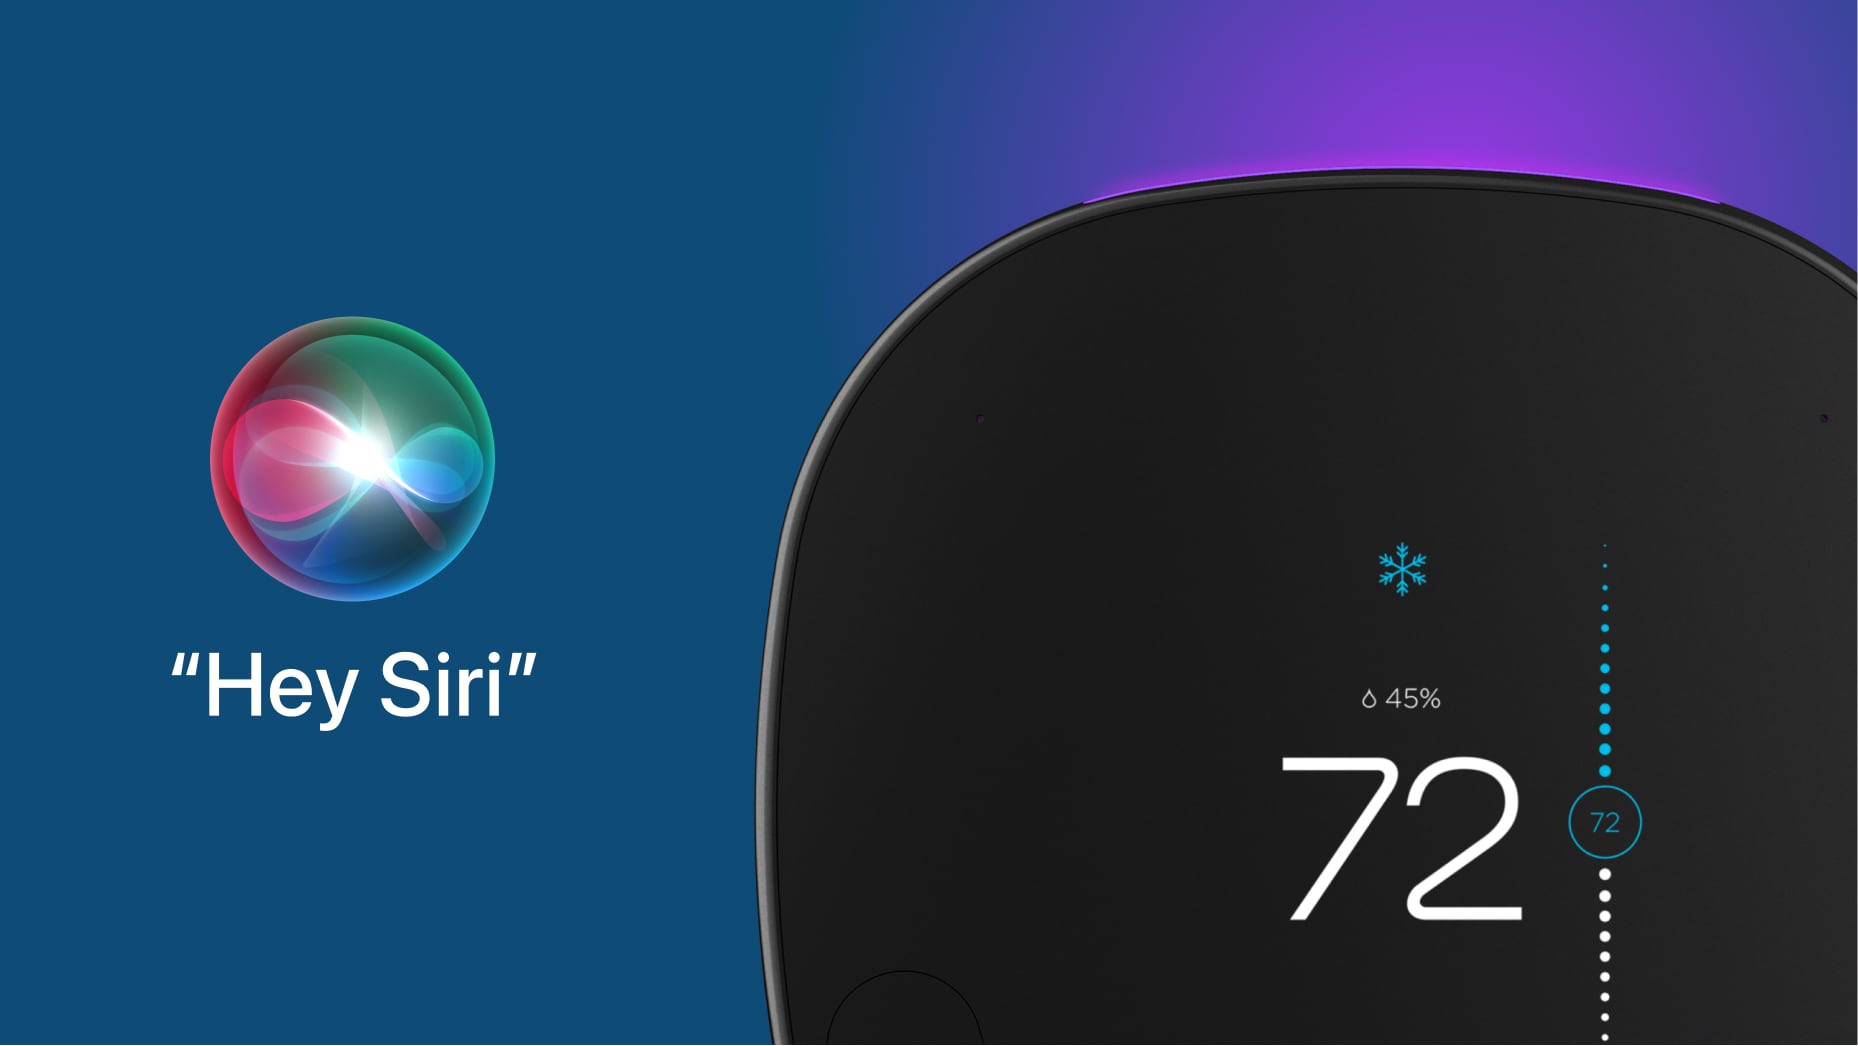 A marketing image from Ecobee showing its smart thermostat and the Hey Siri orb set against a blue/pink gradient